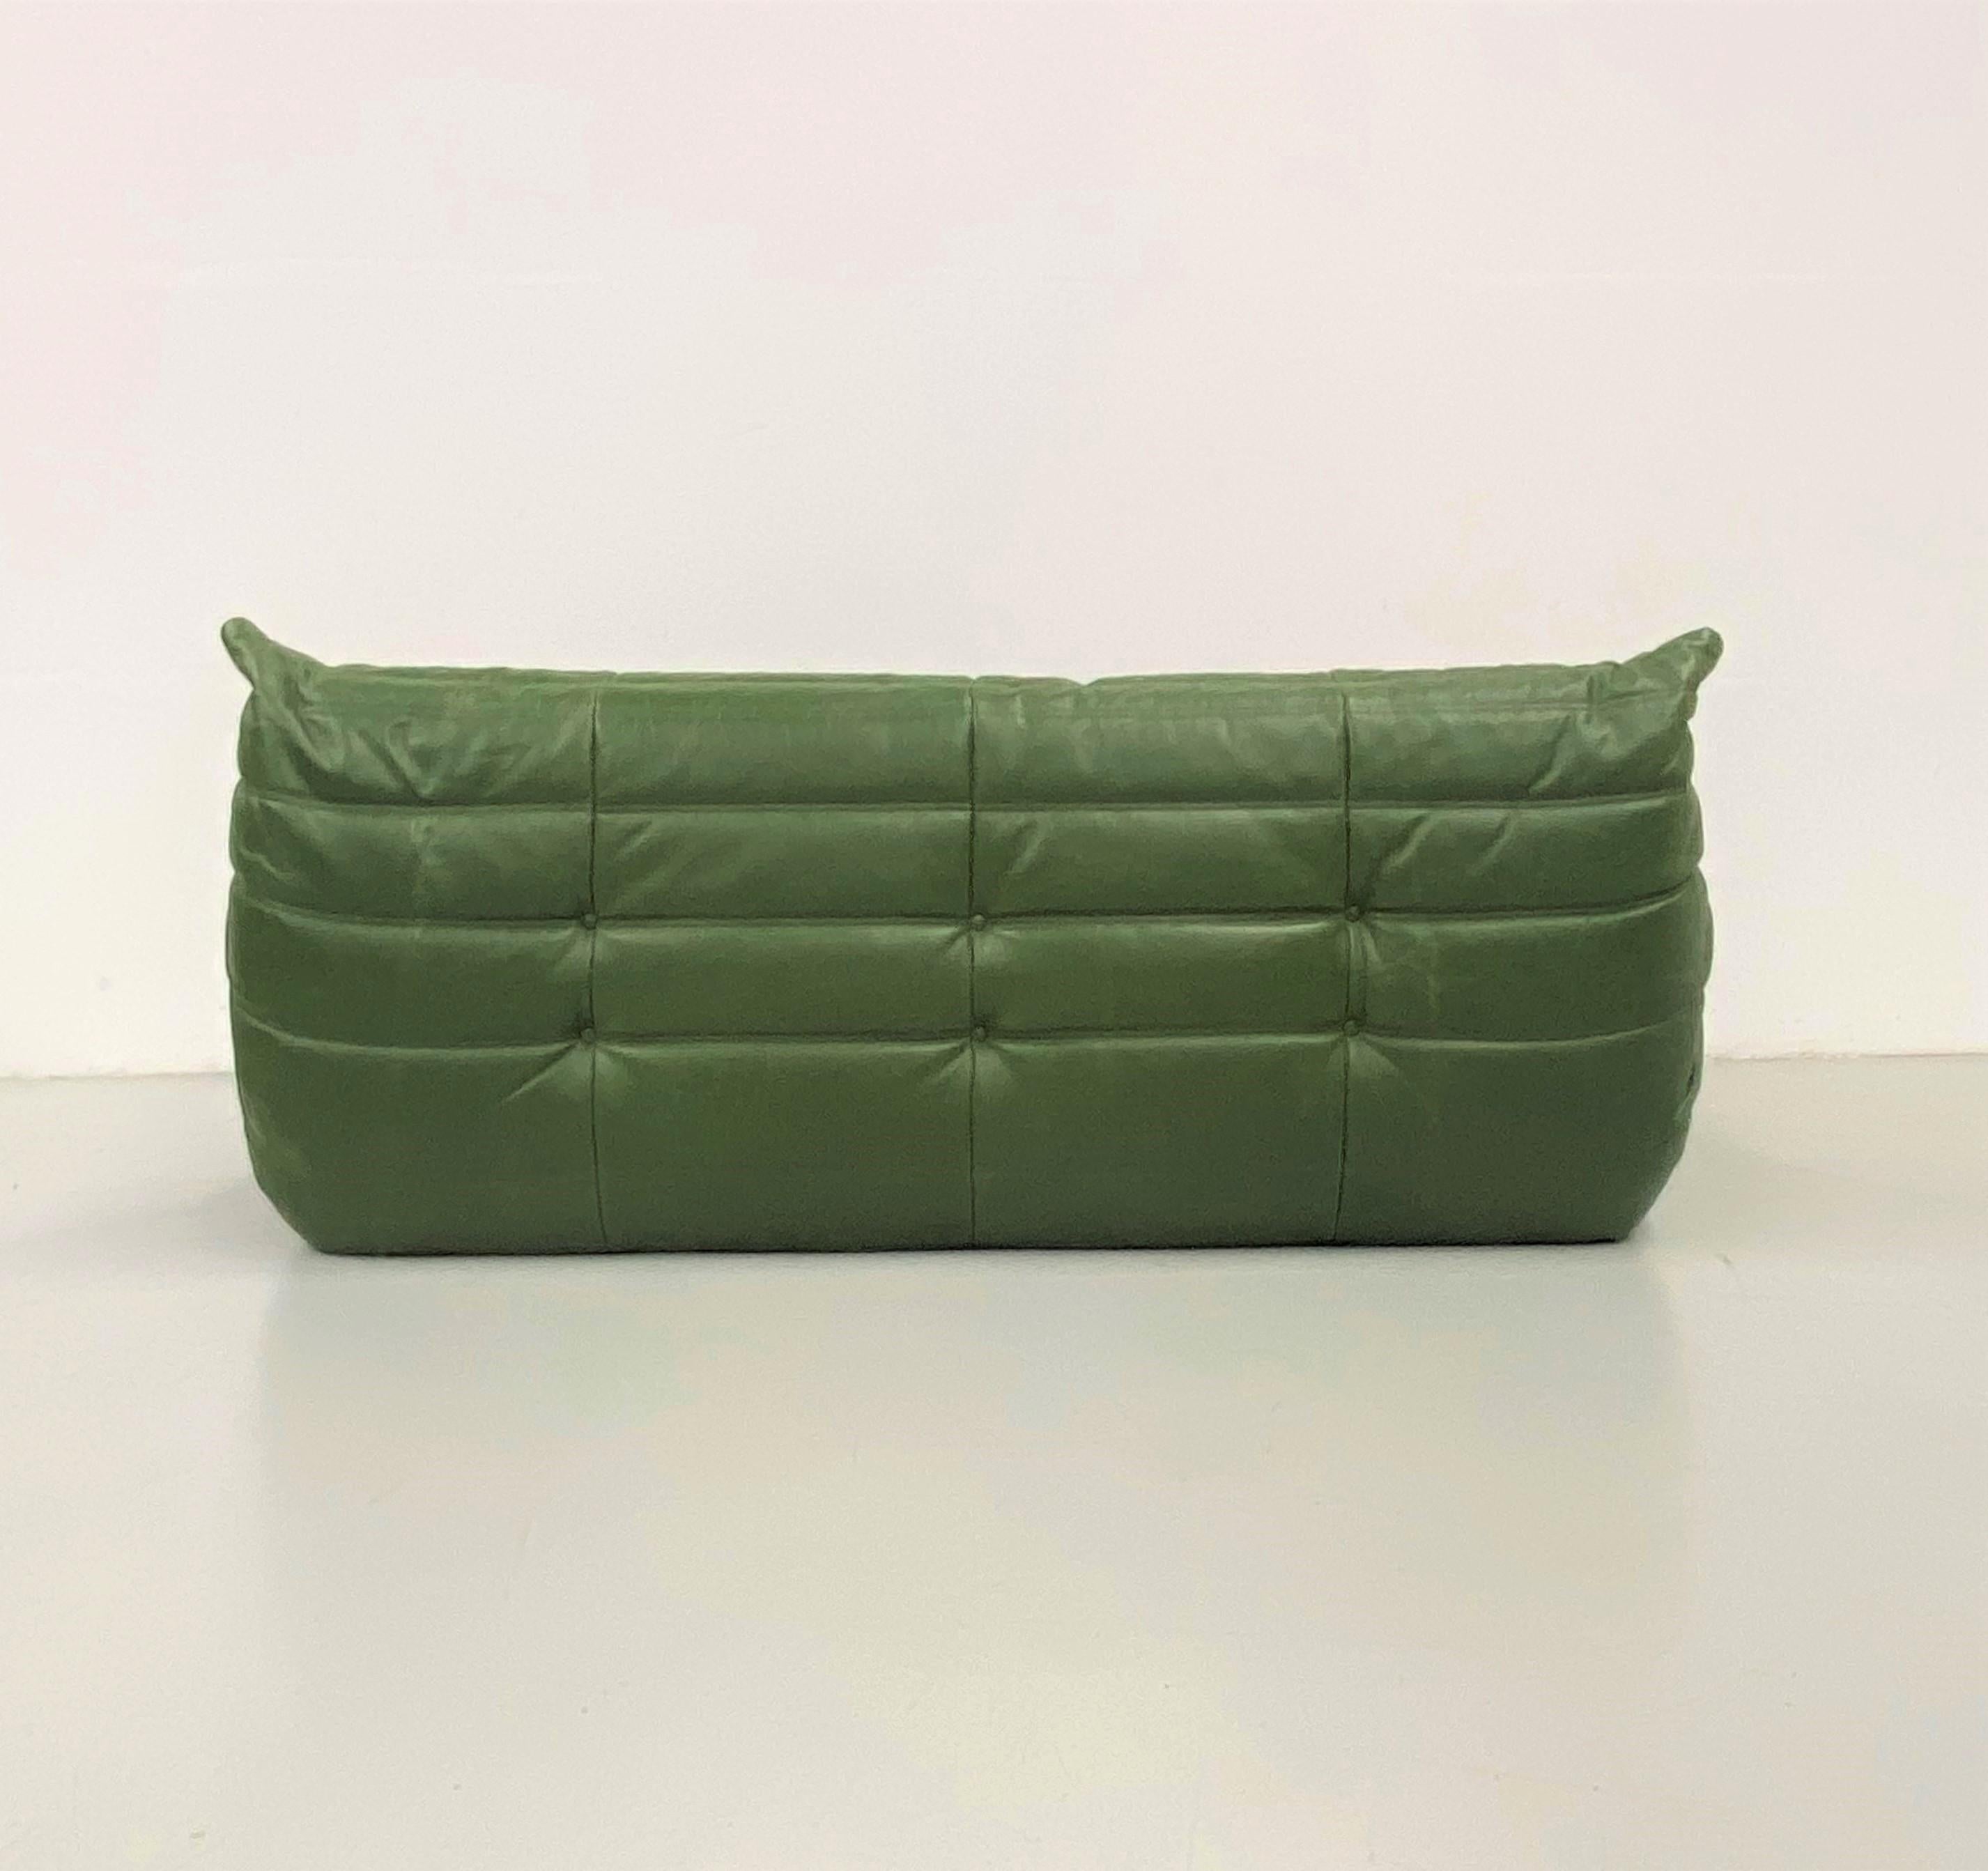 Vintage French Togo Sofa in Forest Green Leather by M. Ducaroy for Ligne Roset 2